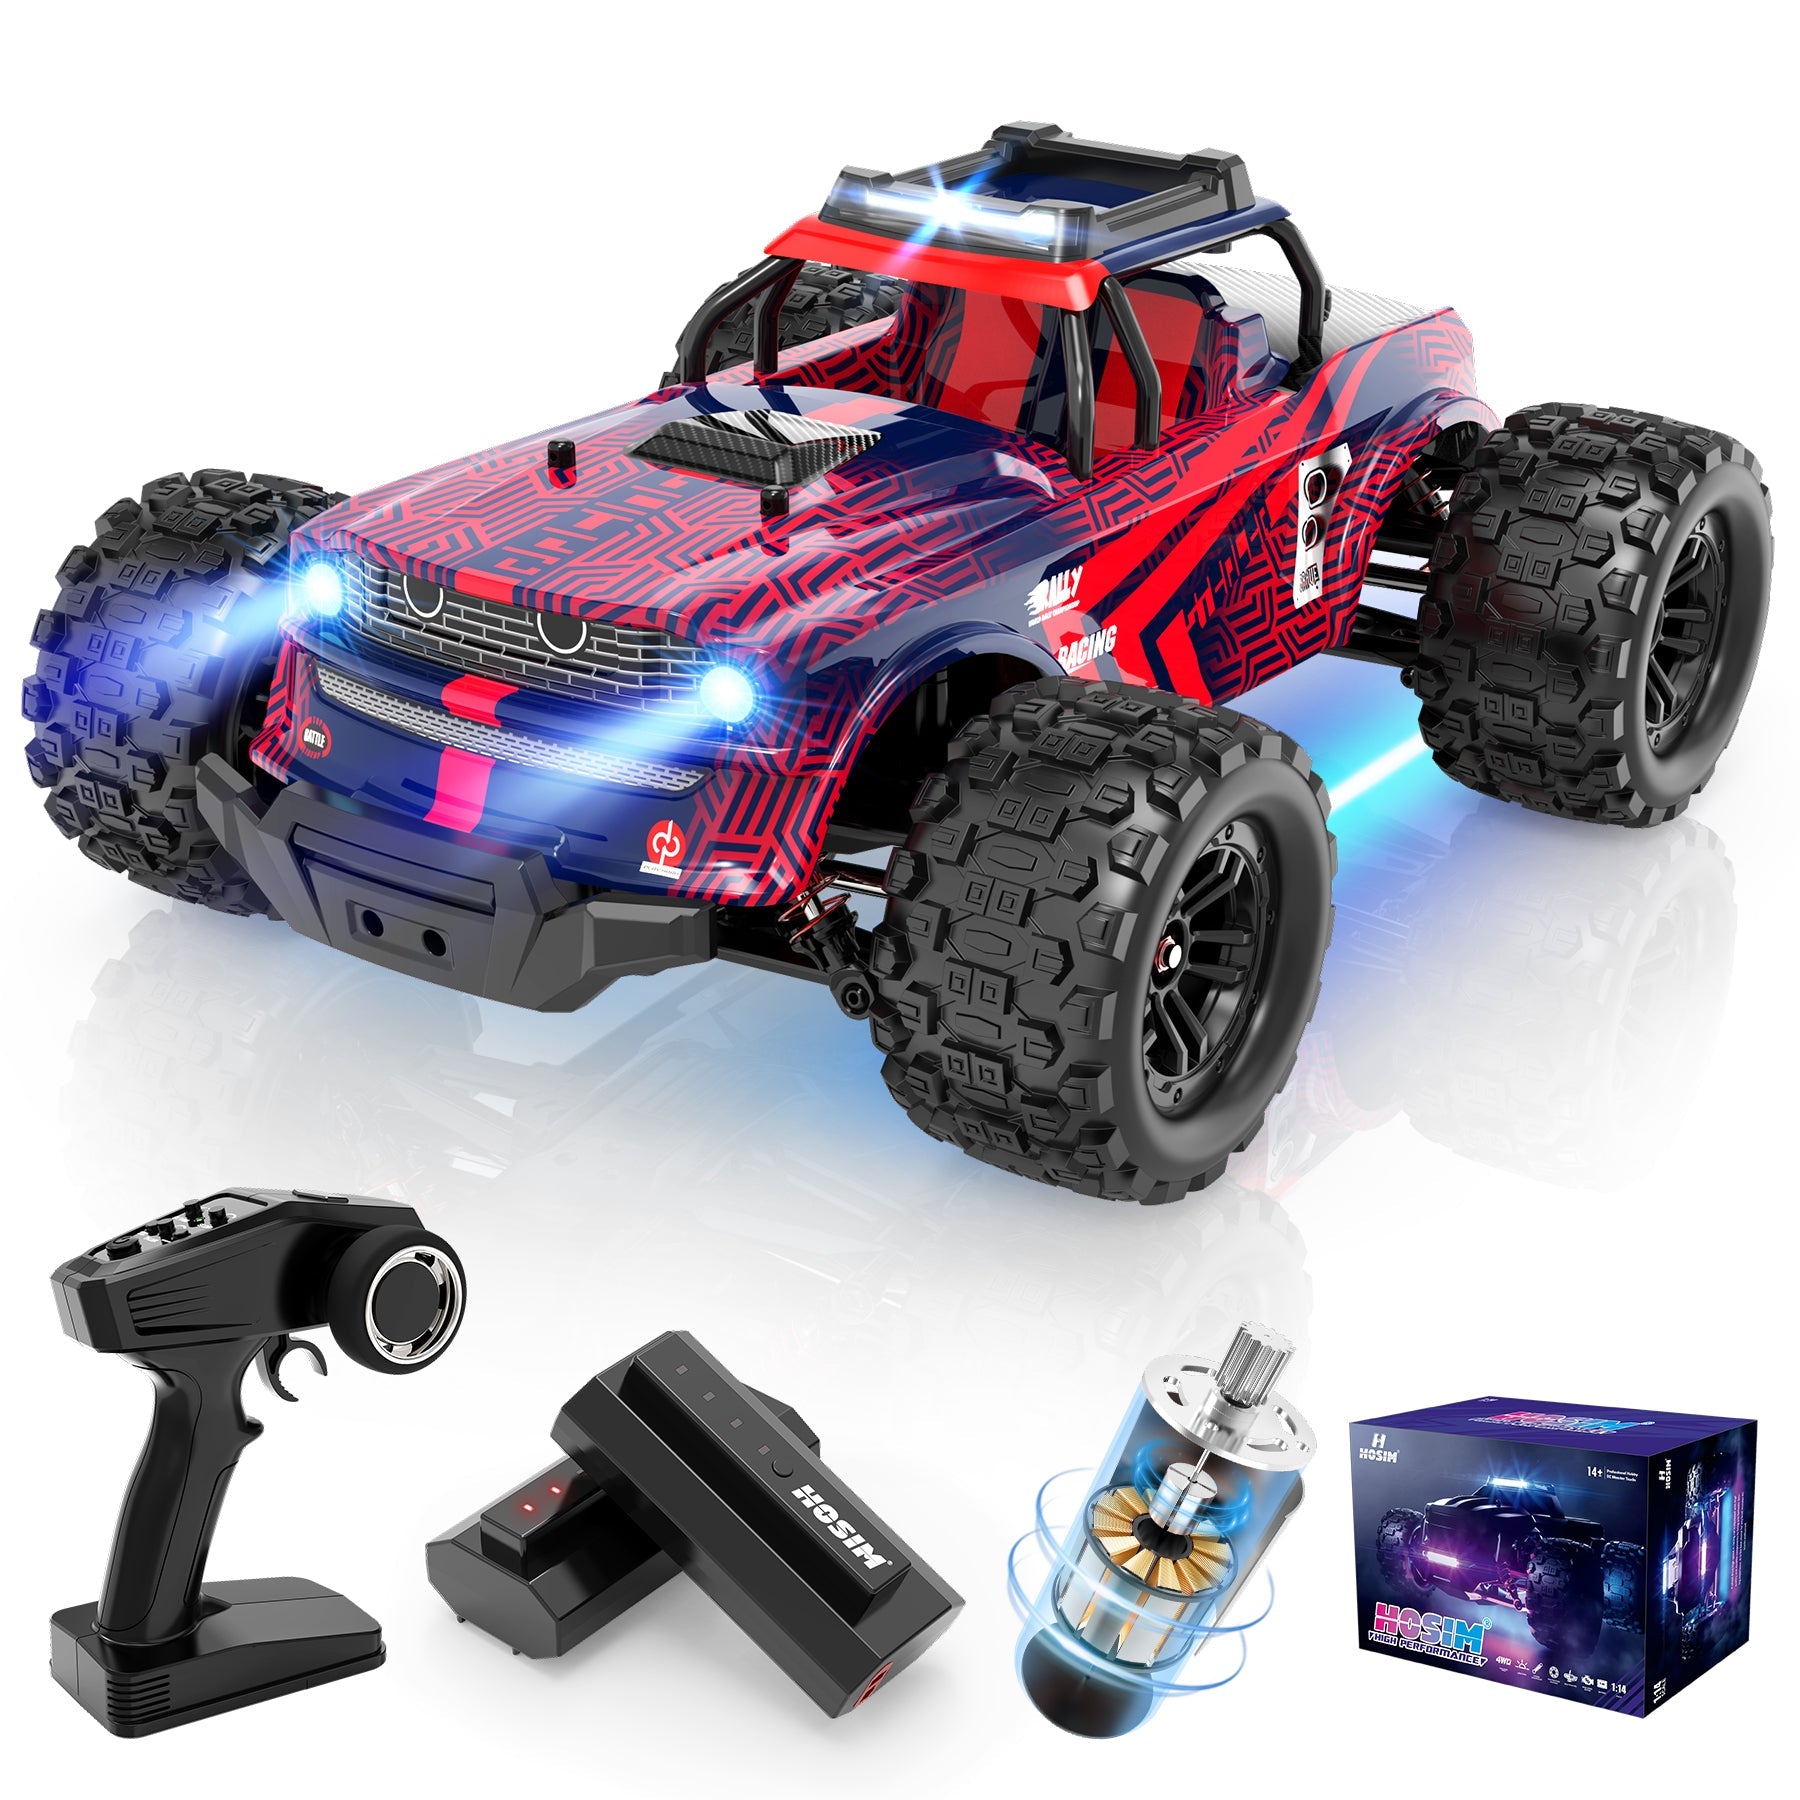 Hosim 1:14 RC Cars with Lights for Adults & Children,40+ KPH Remote Control Car Hobby Electric Off-Road RC Monster Trucks Toys Gifts